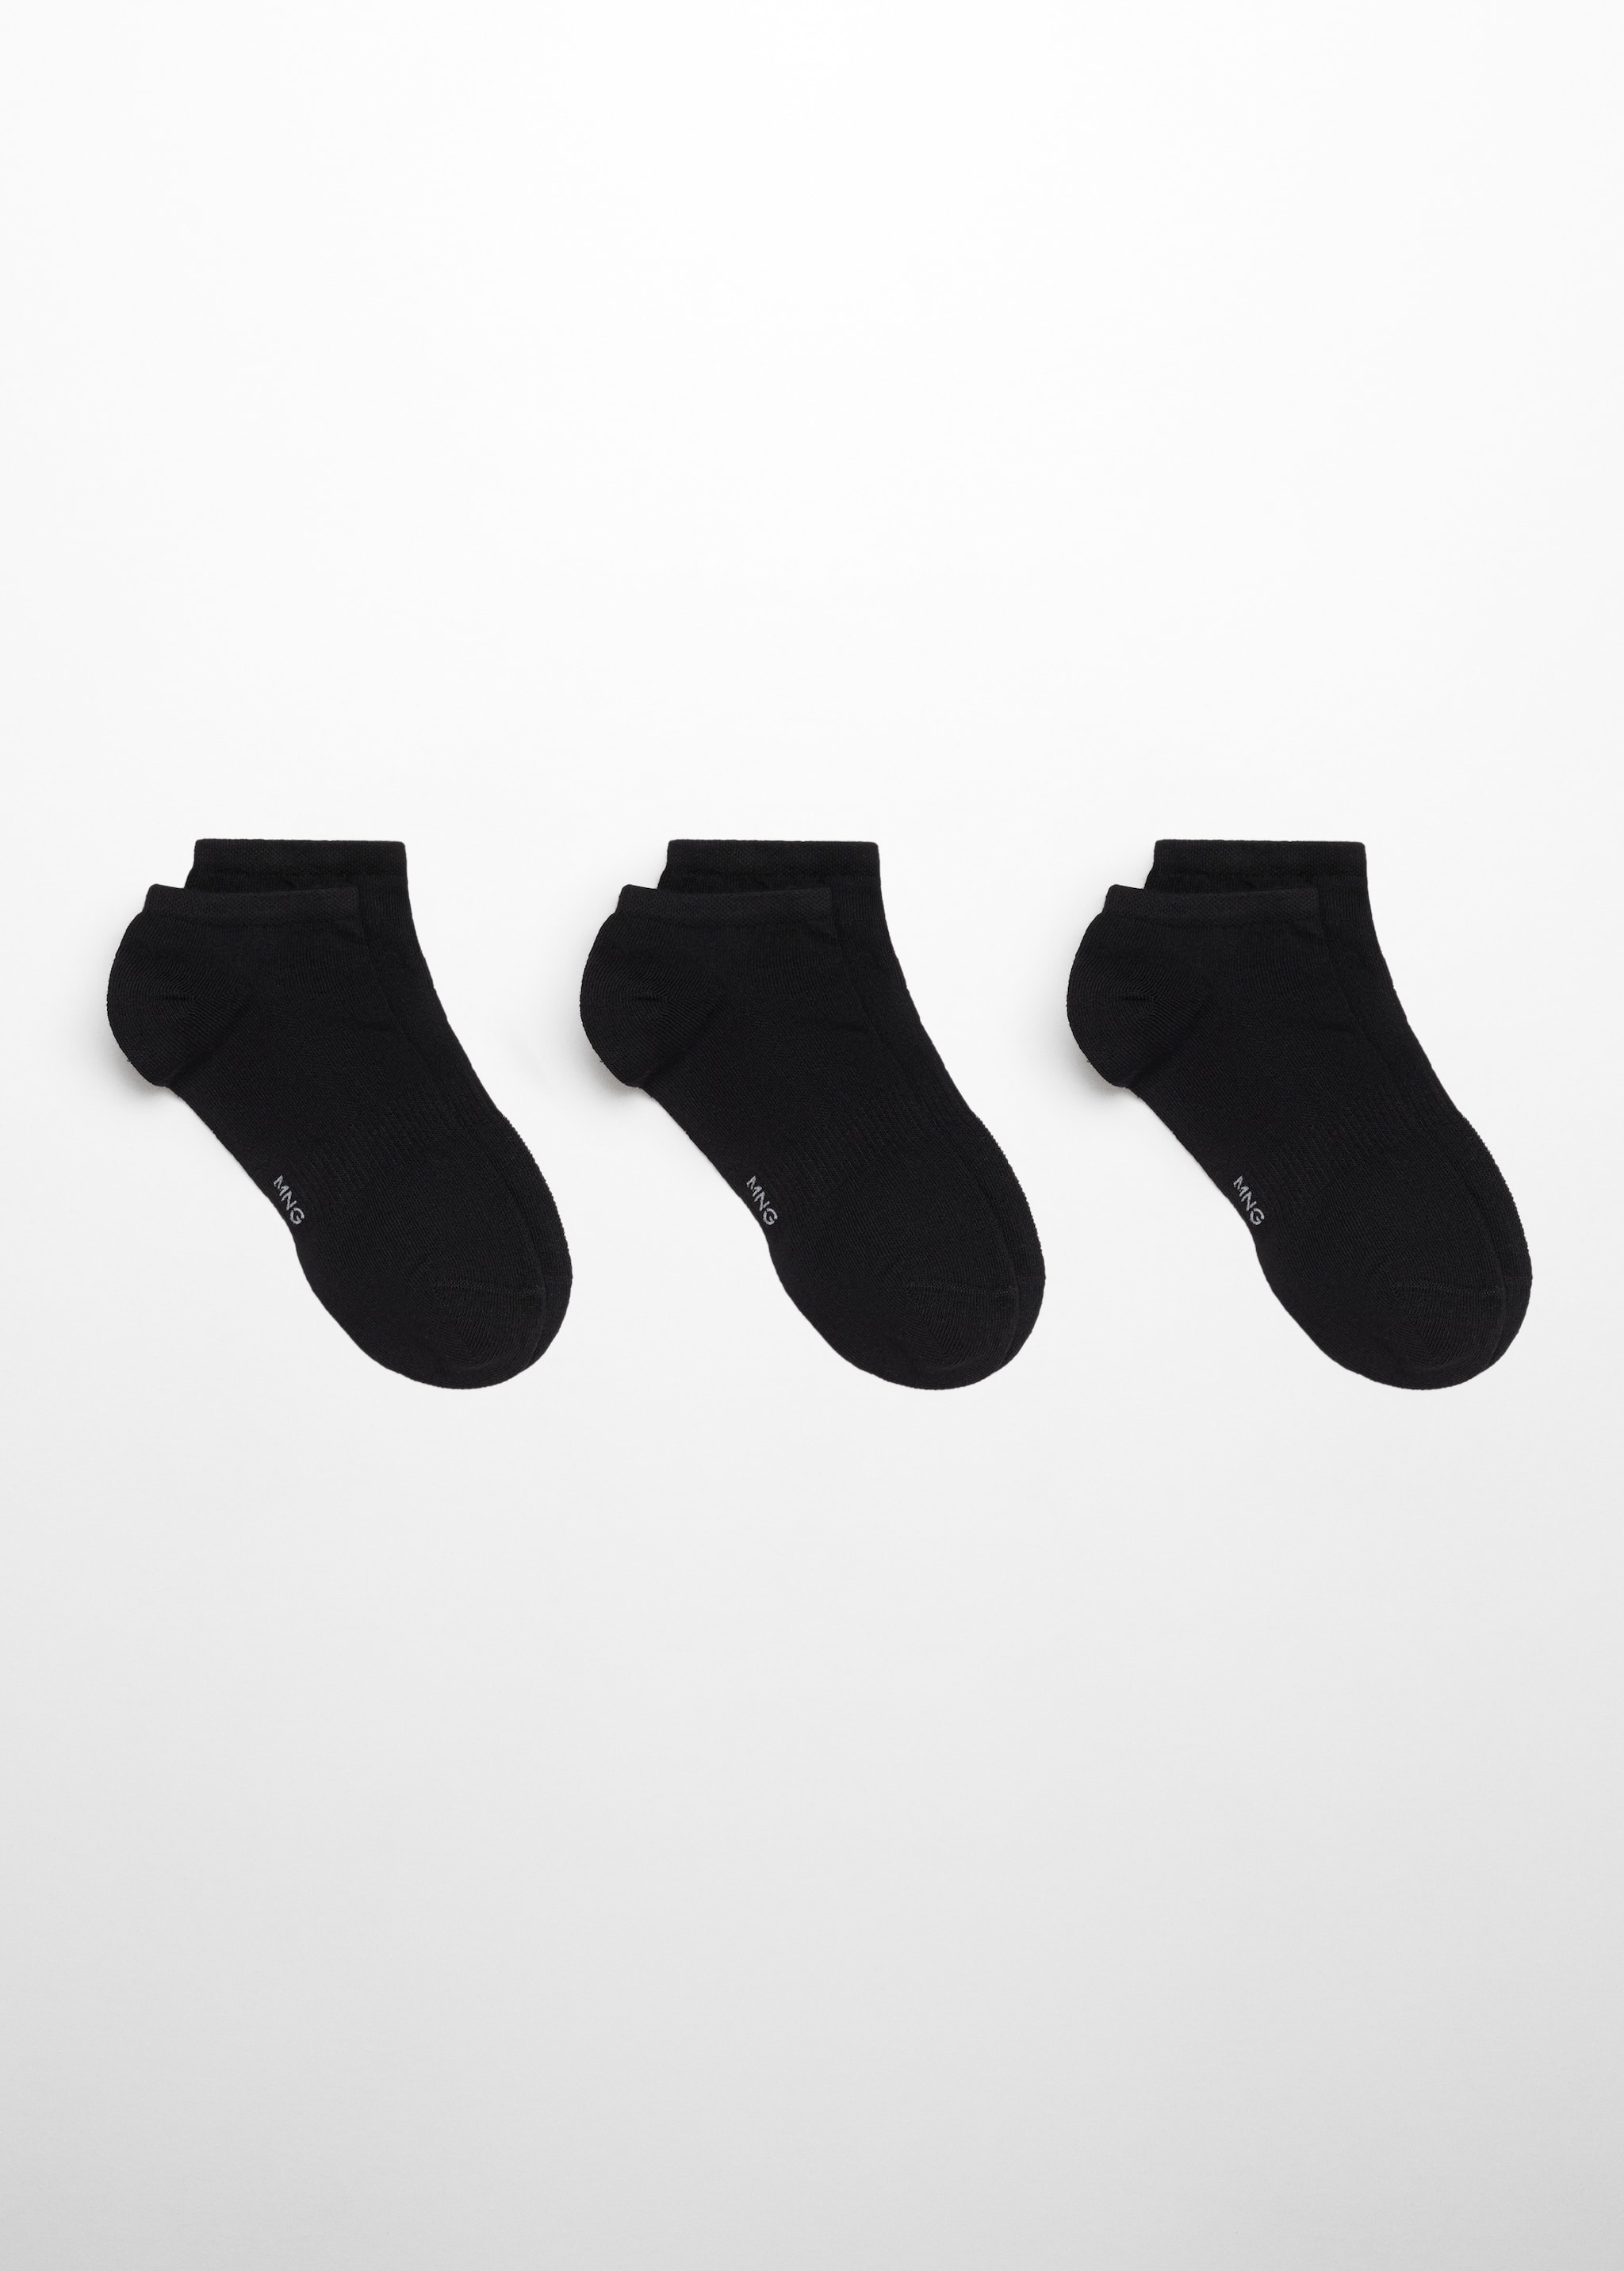 Pack of 3 plain cotton socks - Article without model